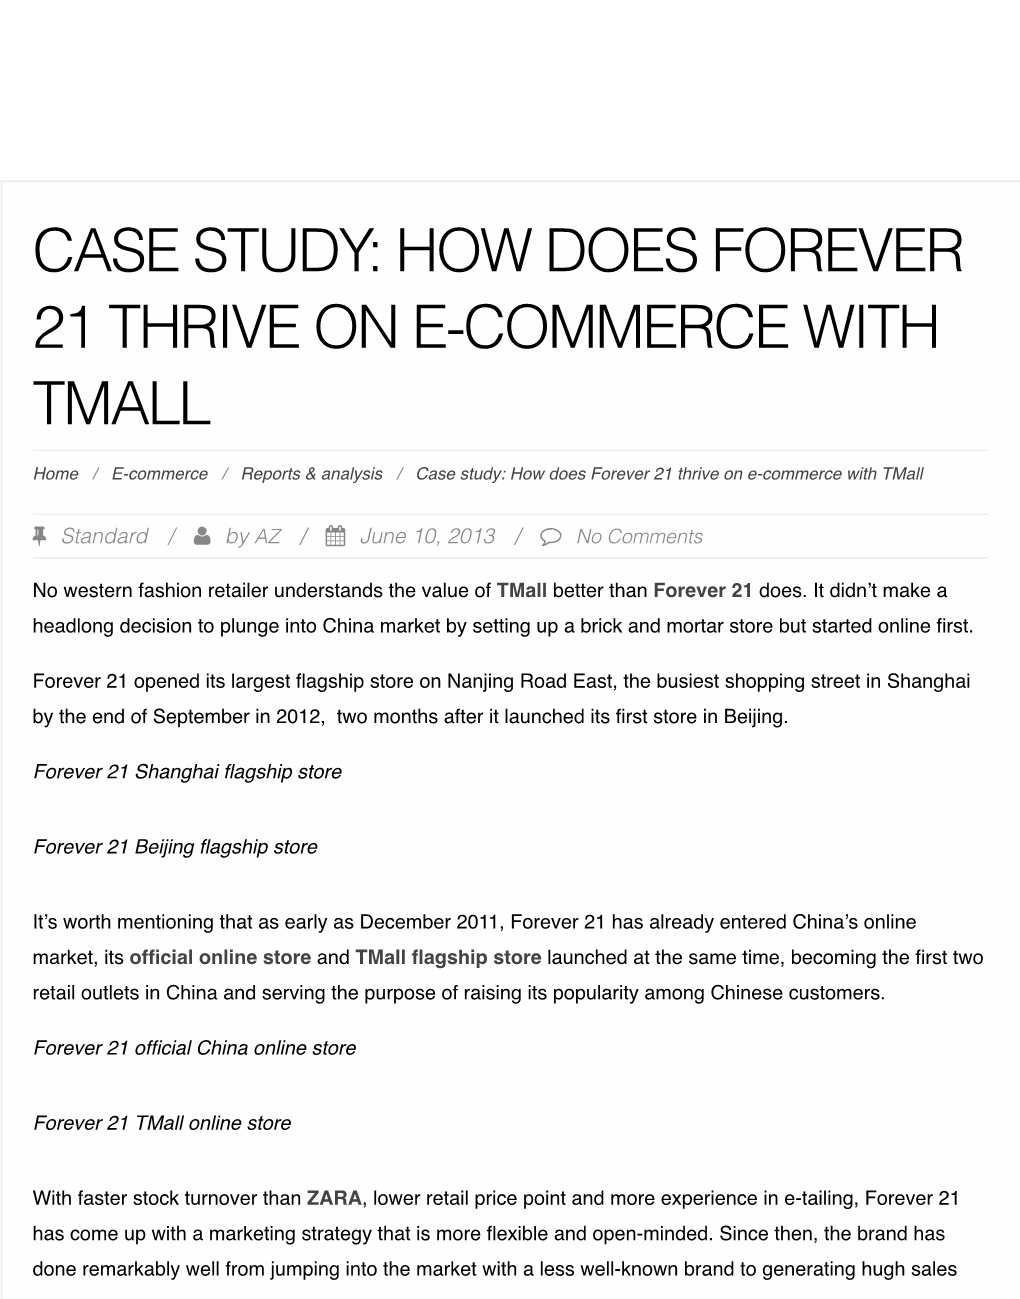 How Does Forever 21 Thrive on E-Commerce with Tmall